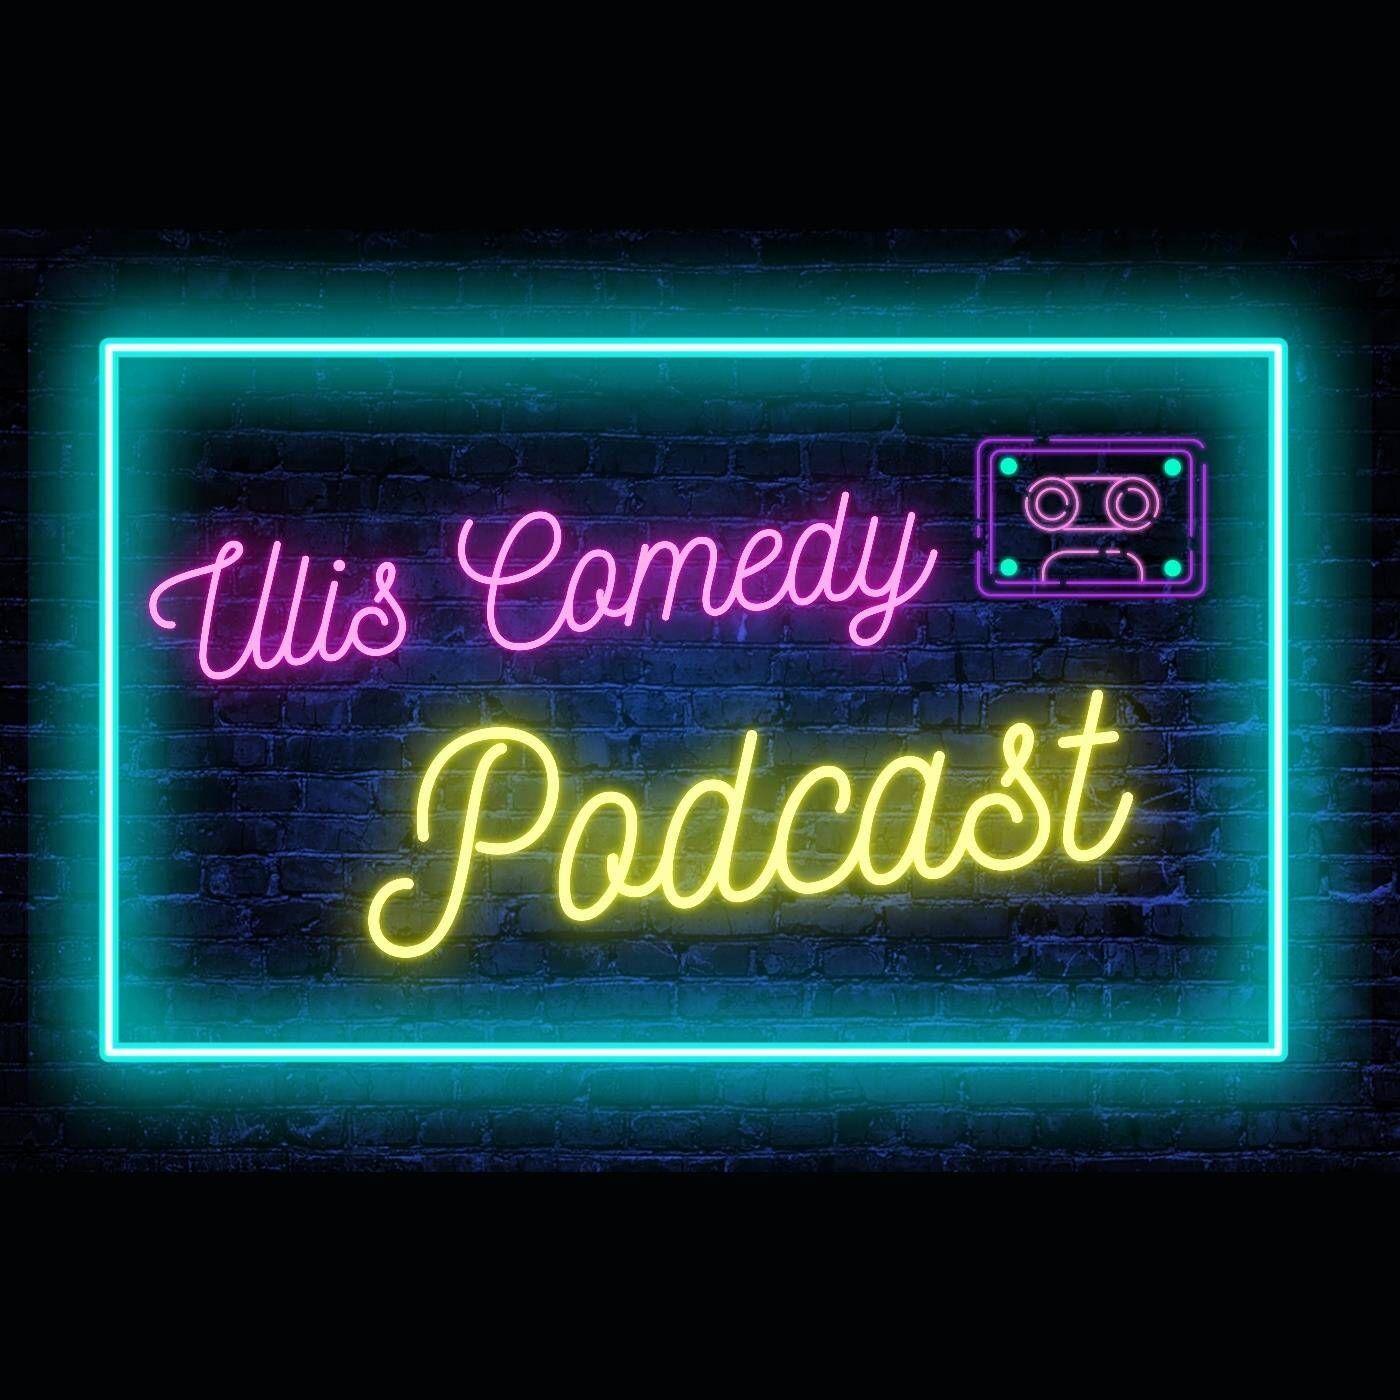 Uli On Air Comedy Podcast